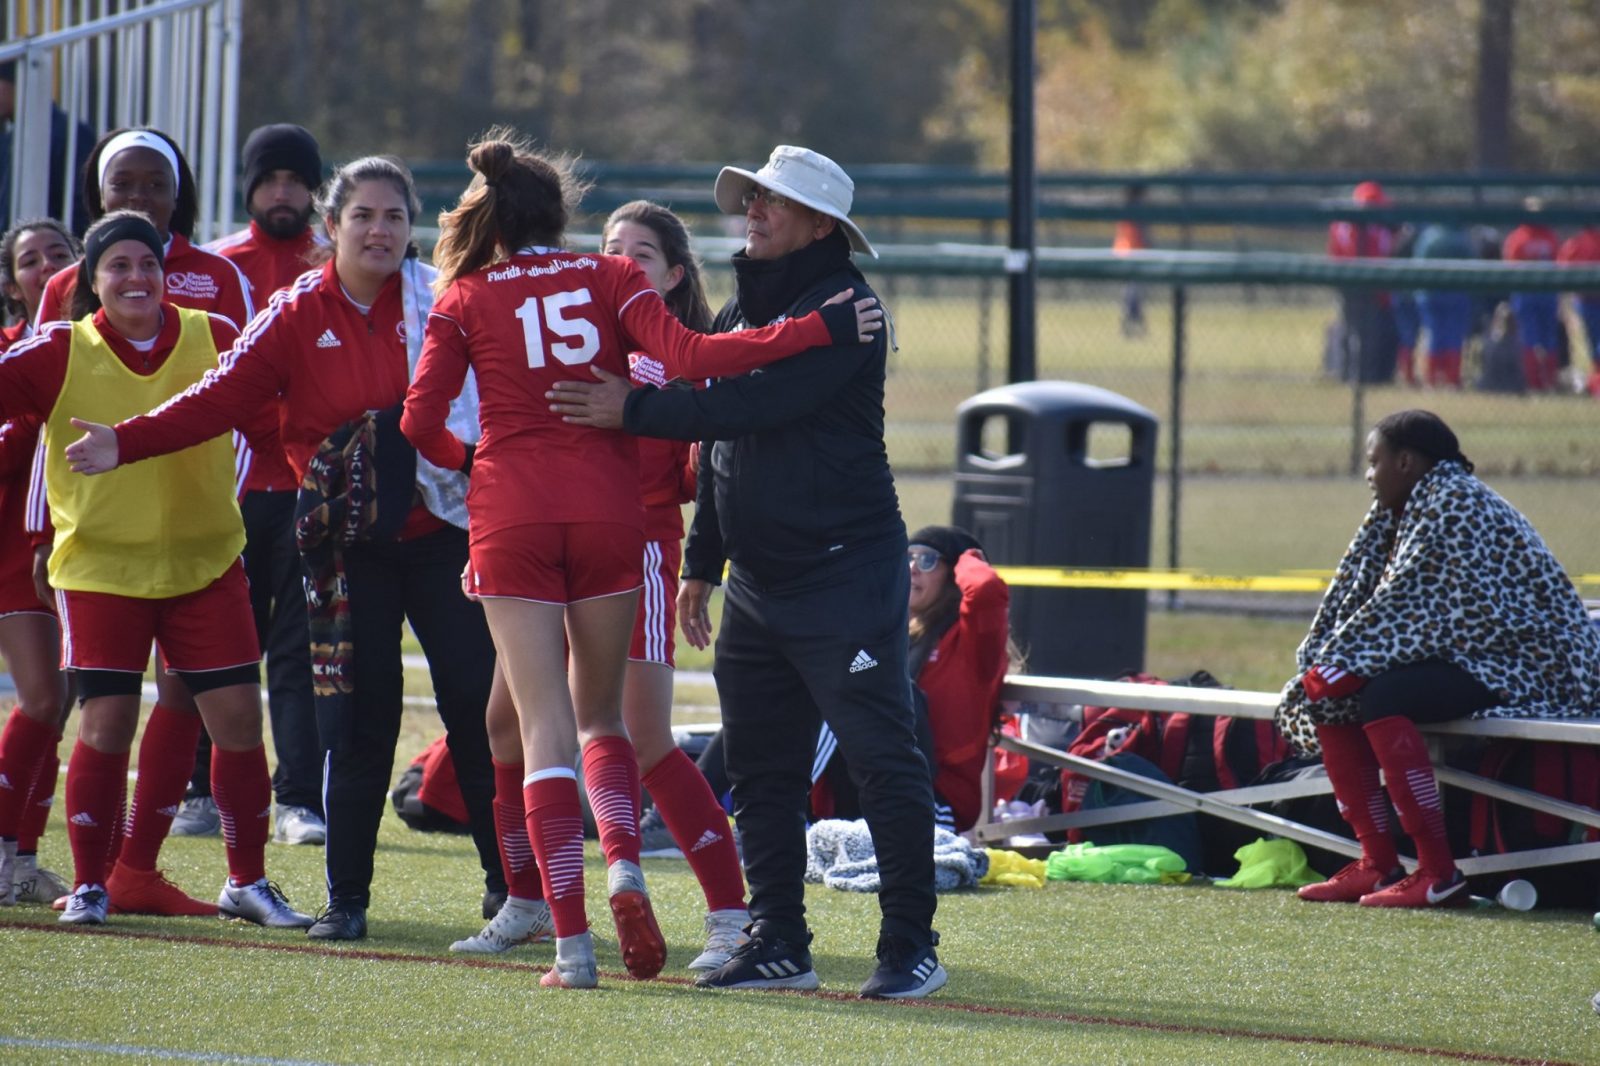 Women's soccer player Mickaela celebrating a goal with coach Giovanni